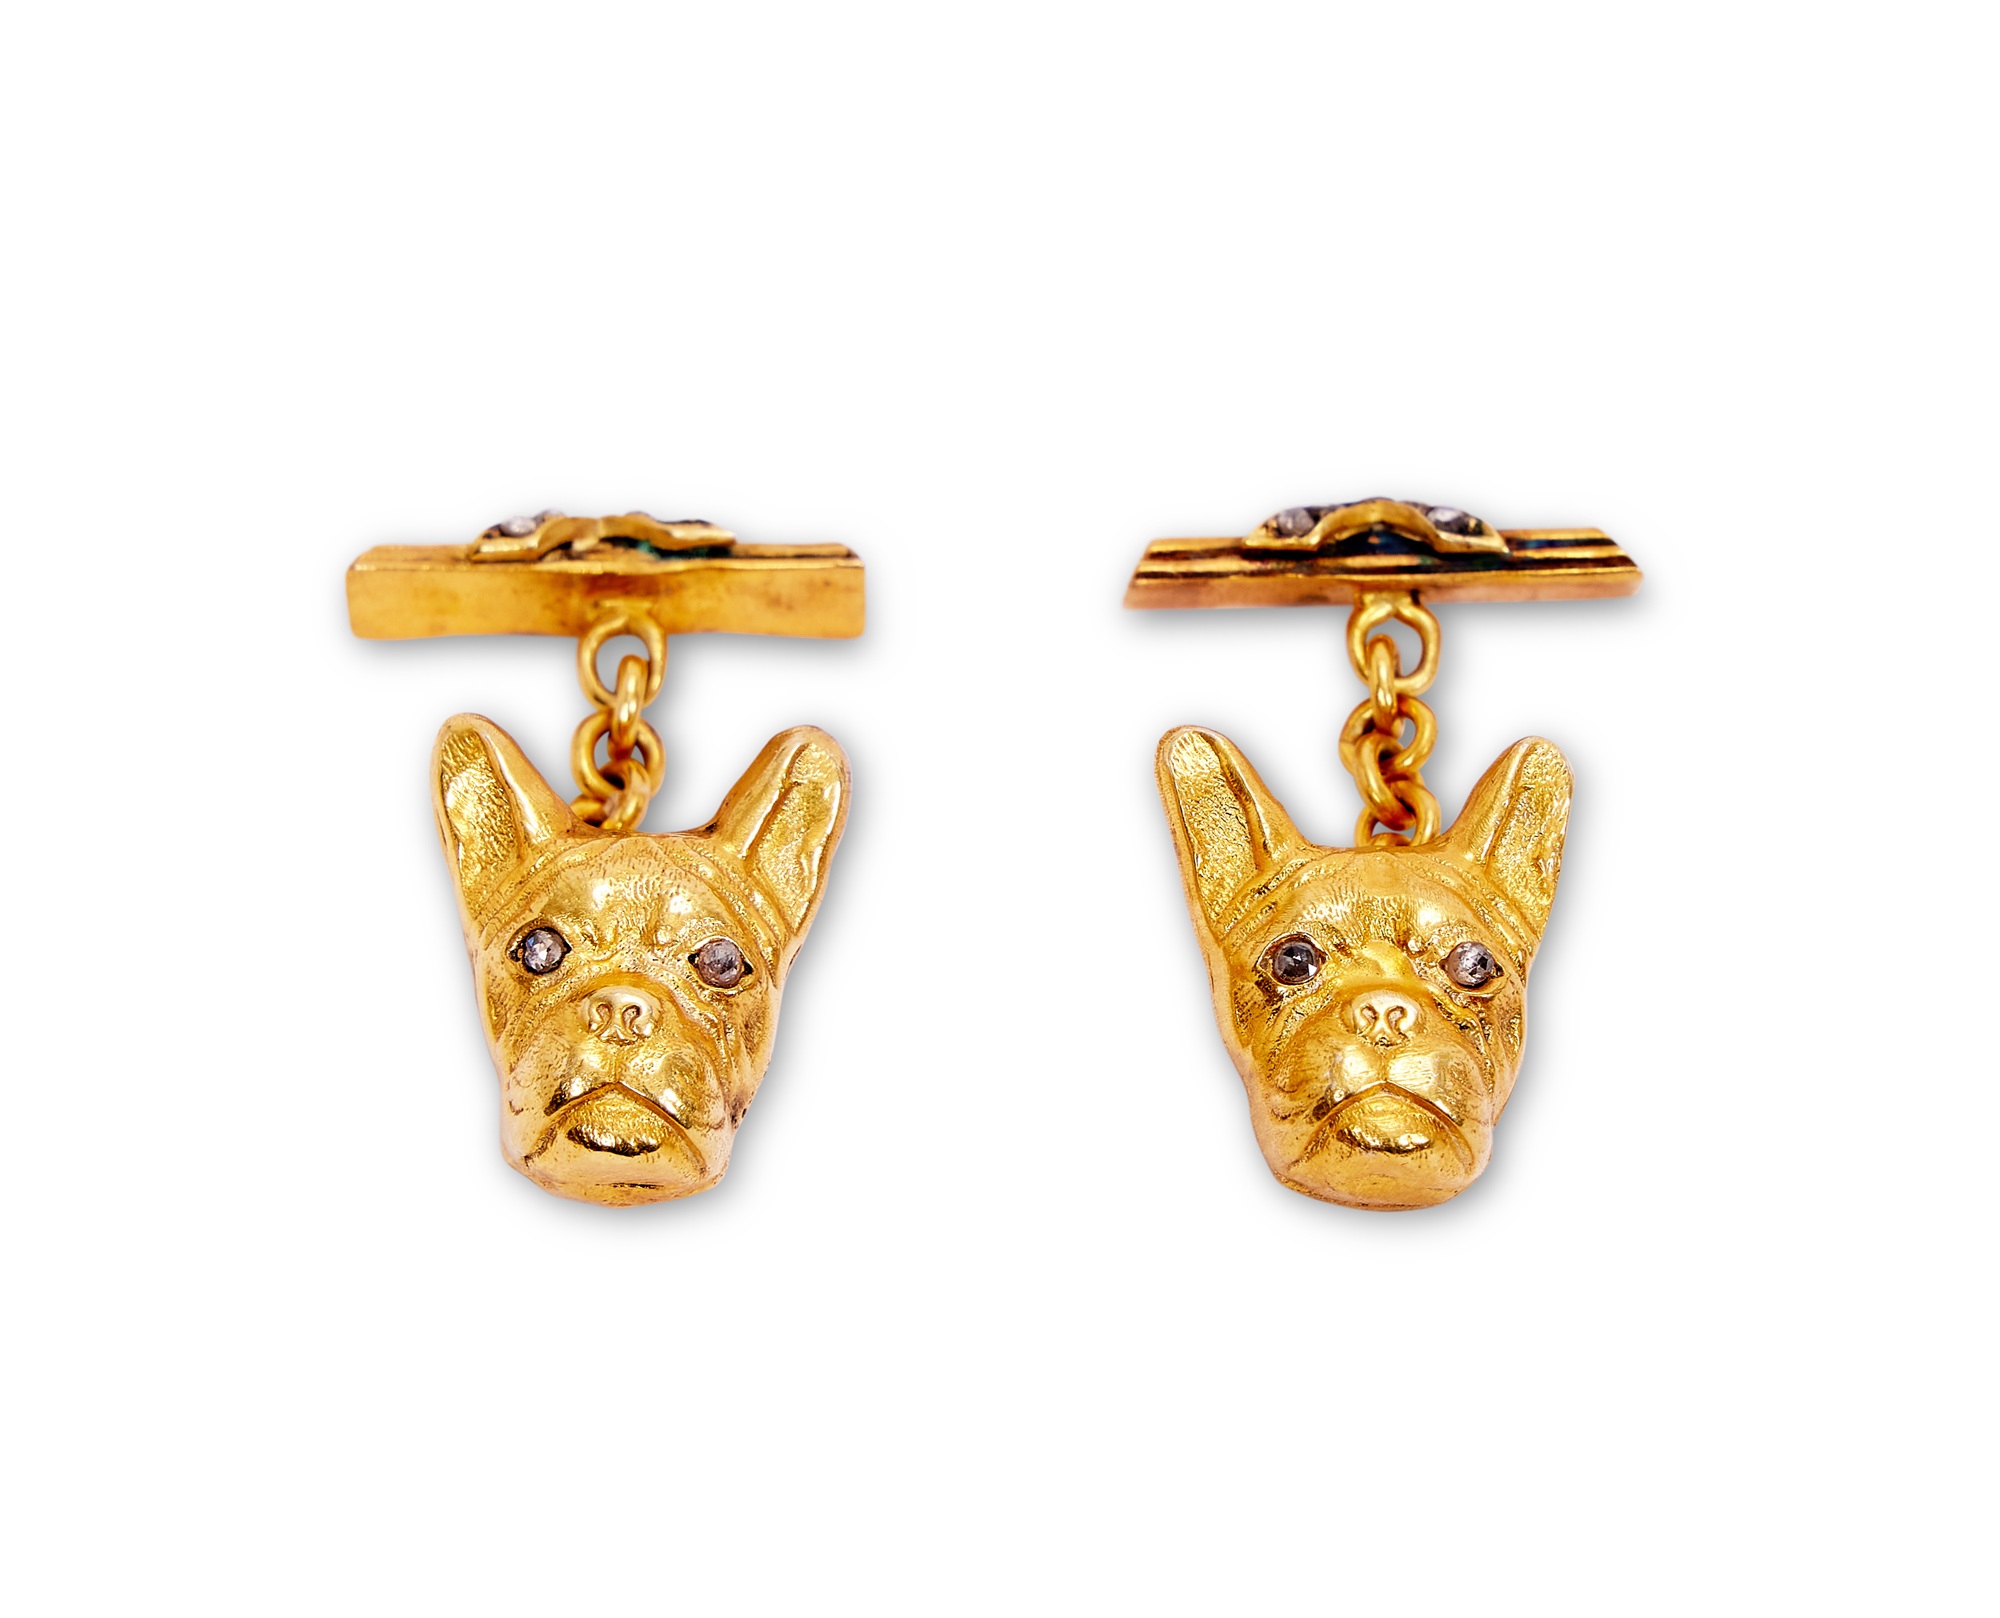 A PAIR OF SILVER GILT AND DIAMOND SET RUSSIAN STYLE CUFFLINKS MODELLED WITH BULLDOGS